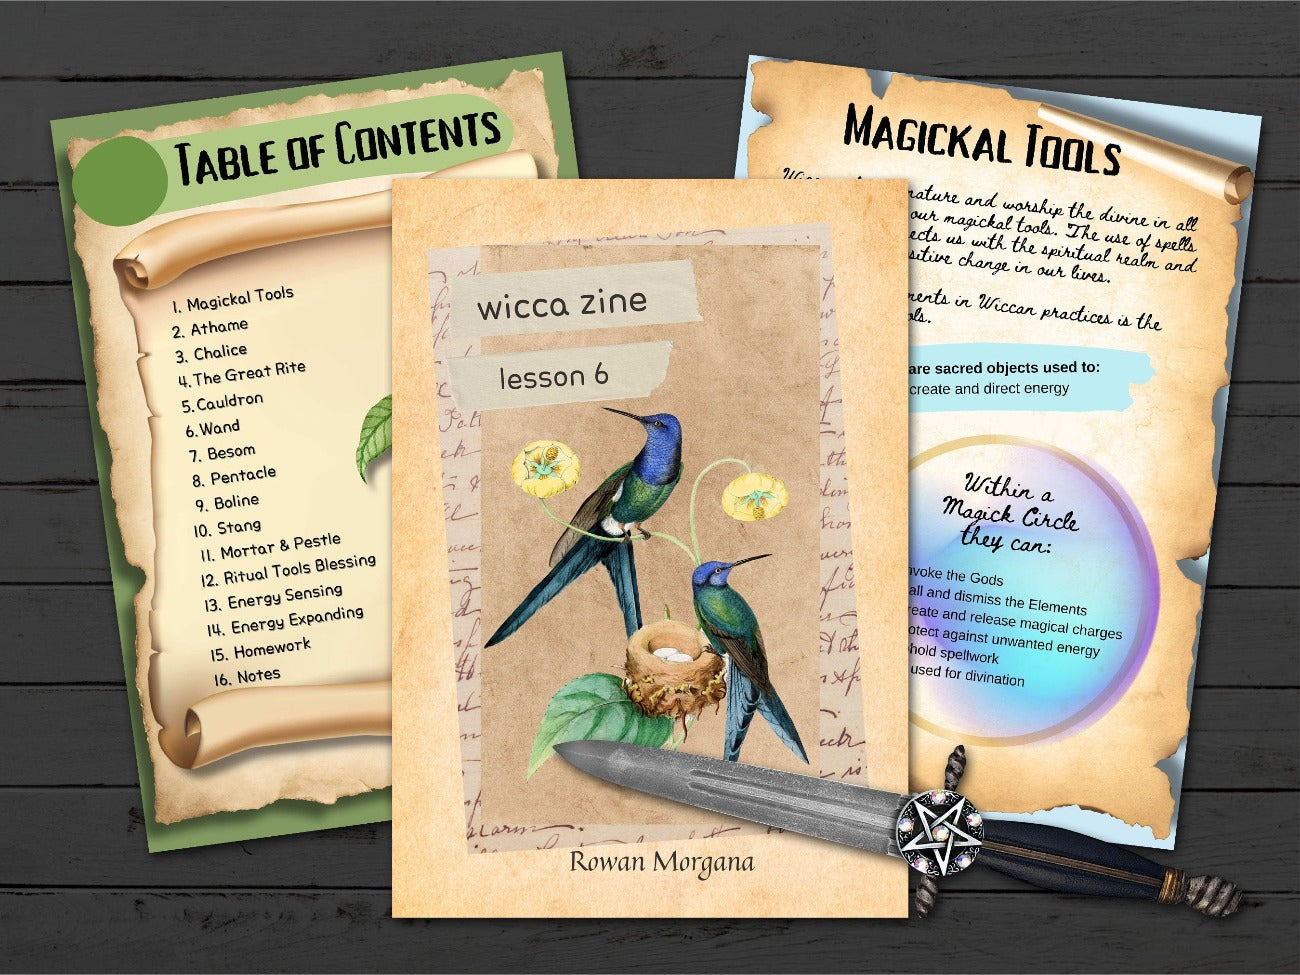 WICCA ZINE Lesson 6 - Table of Contents, Front Page and Magickal Tools overview pages - Morgana Magick Spell